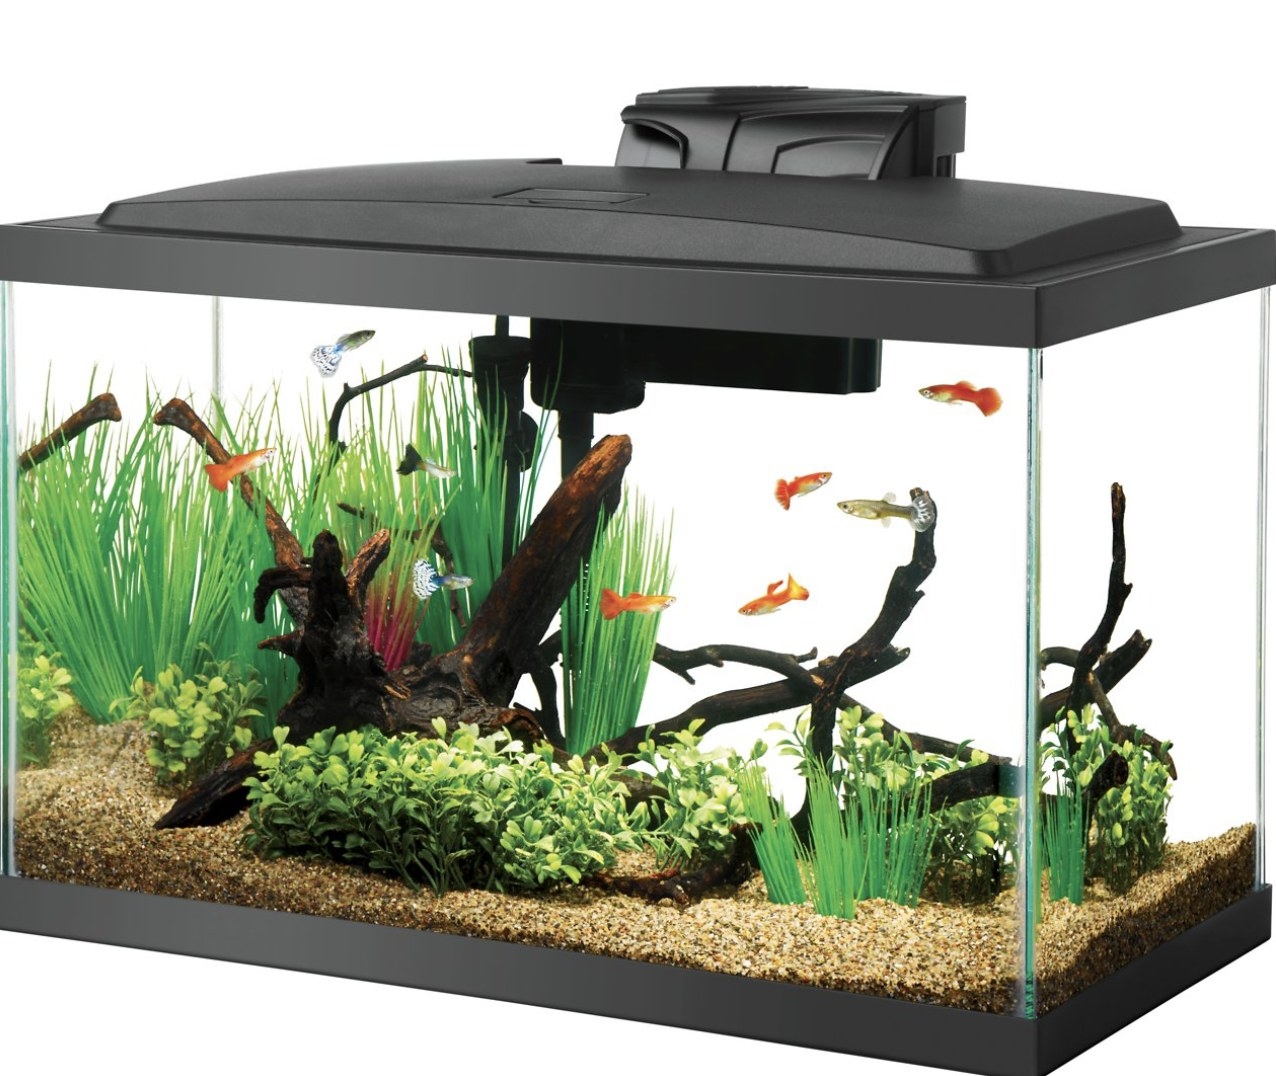 The clear glass tank has a black top and is full of fish, wood, vegetation and pebbles